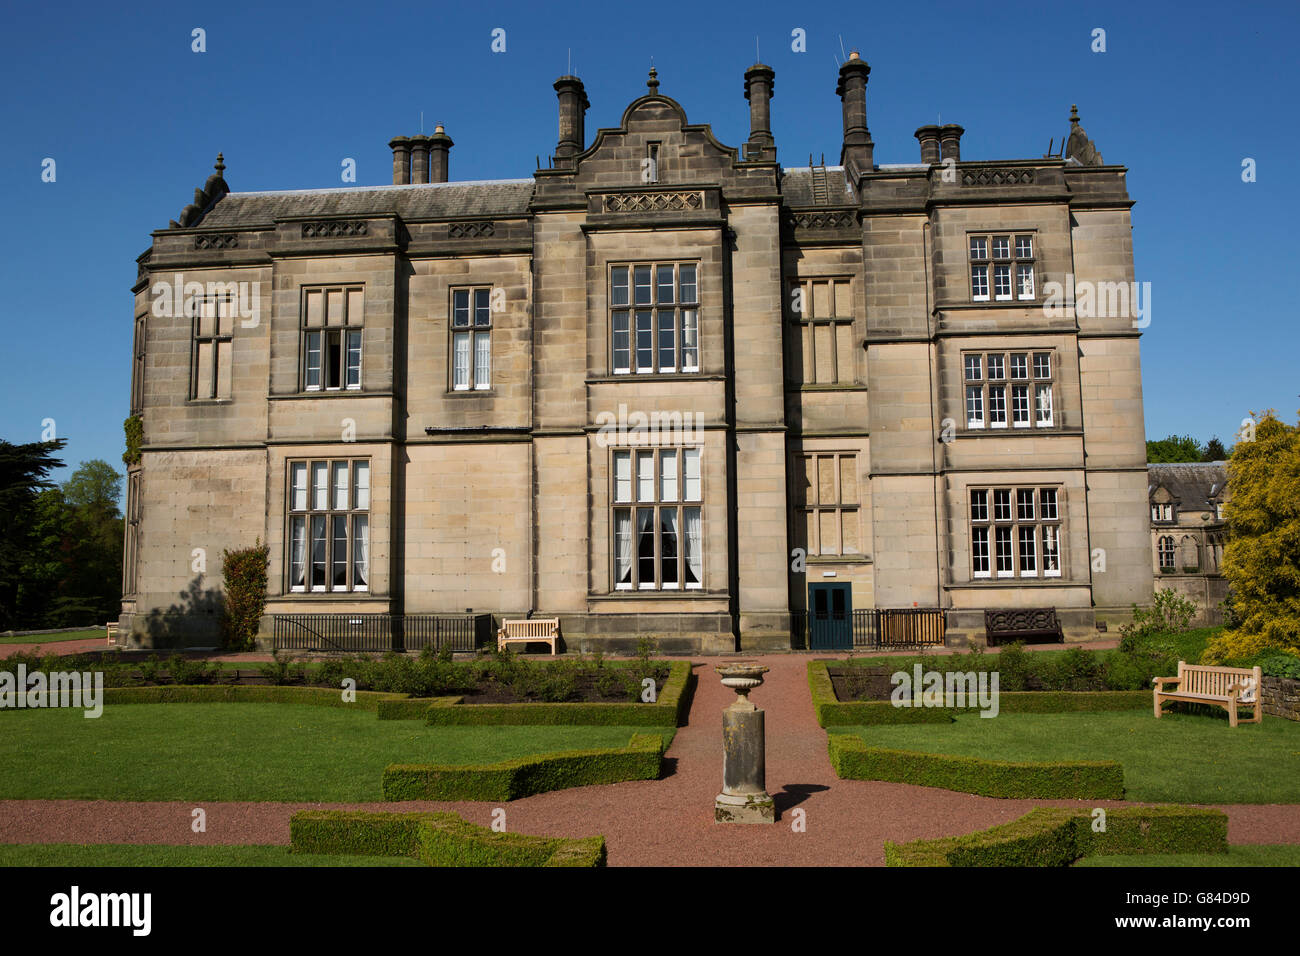 Matfen Hall in Northumberland, England. The Neo-Gothic manor house is a luxury hotel with a restaurant, spa and golf course. Stock Photo